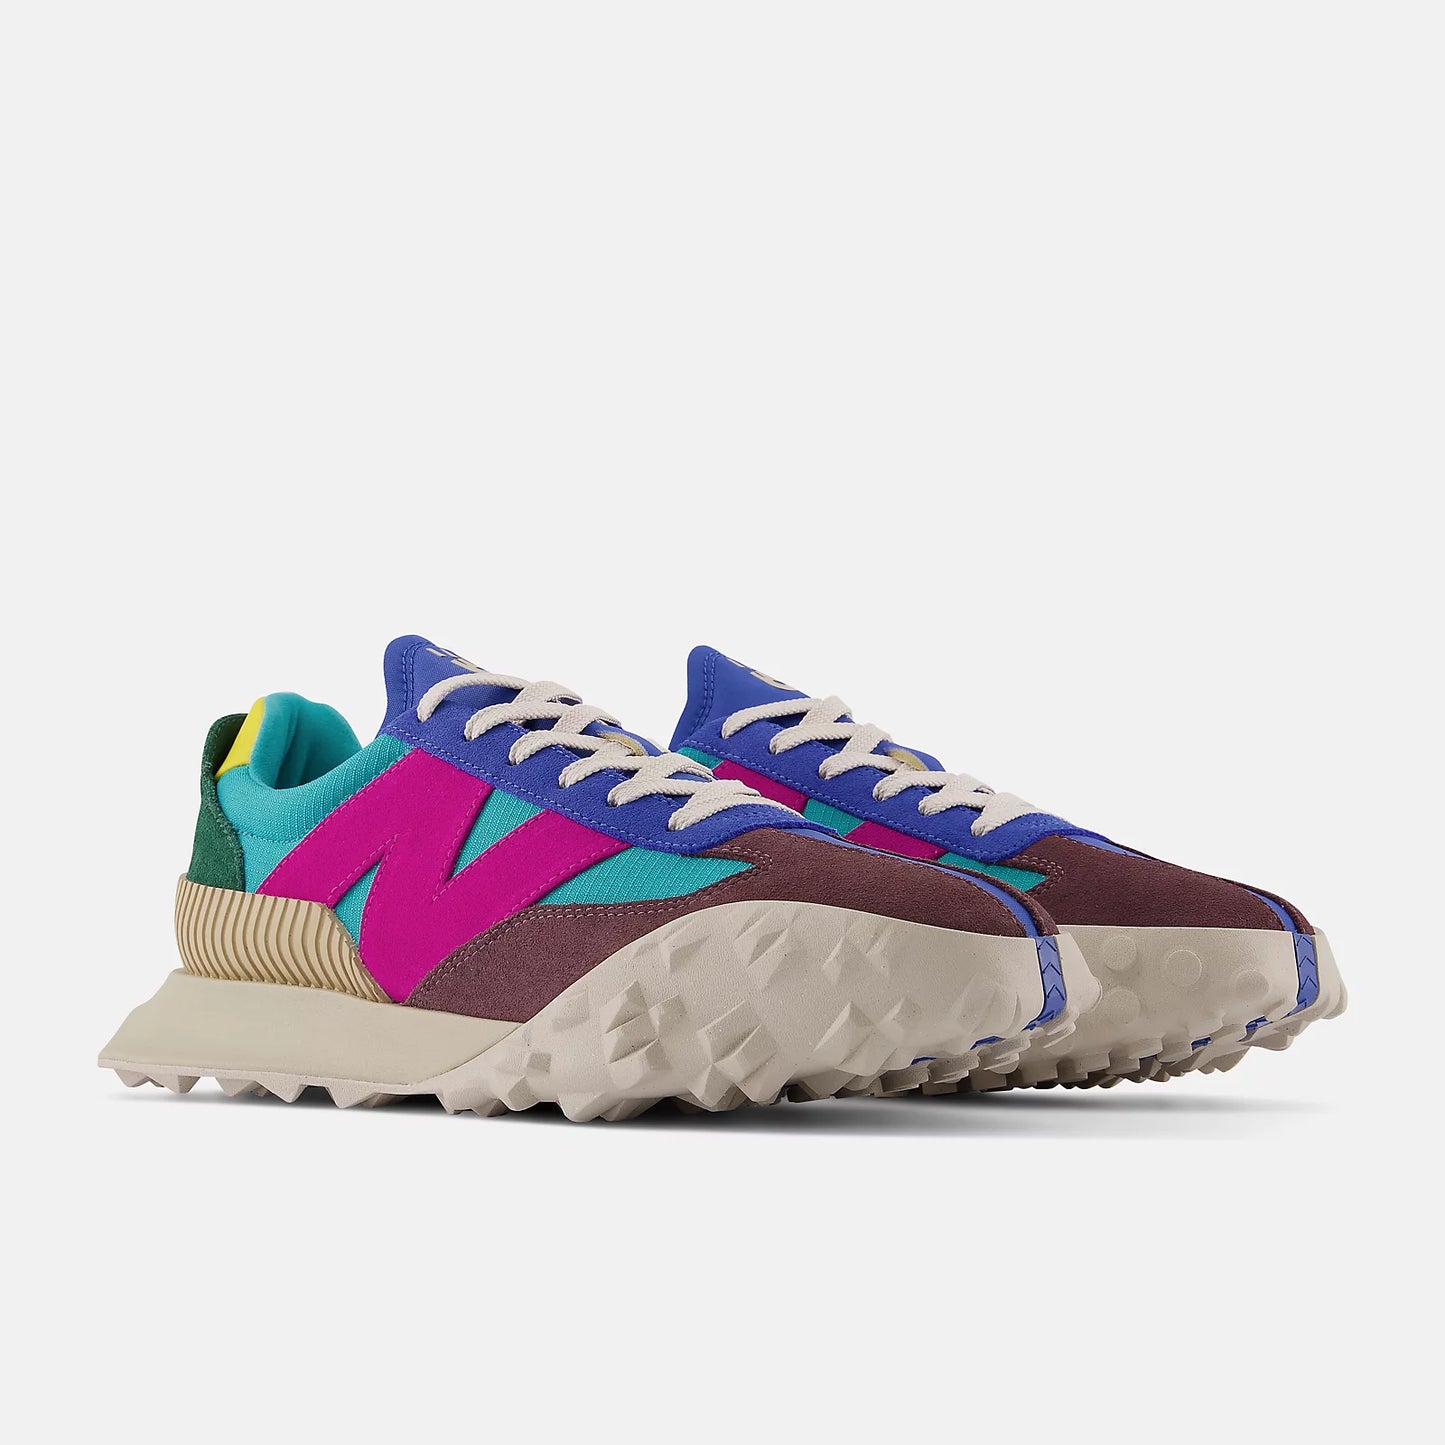 NEW BALANCE UXC72CA - Electric teal con truffle y cosmic orchid